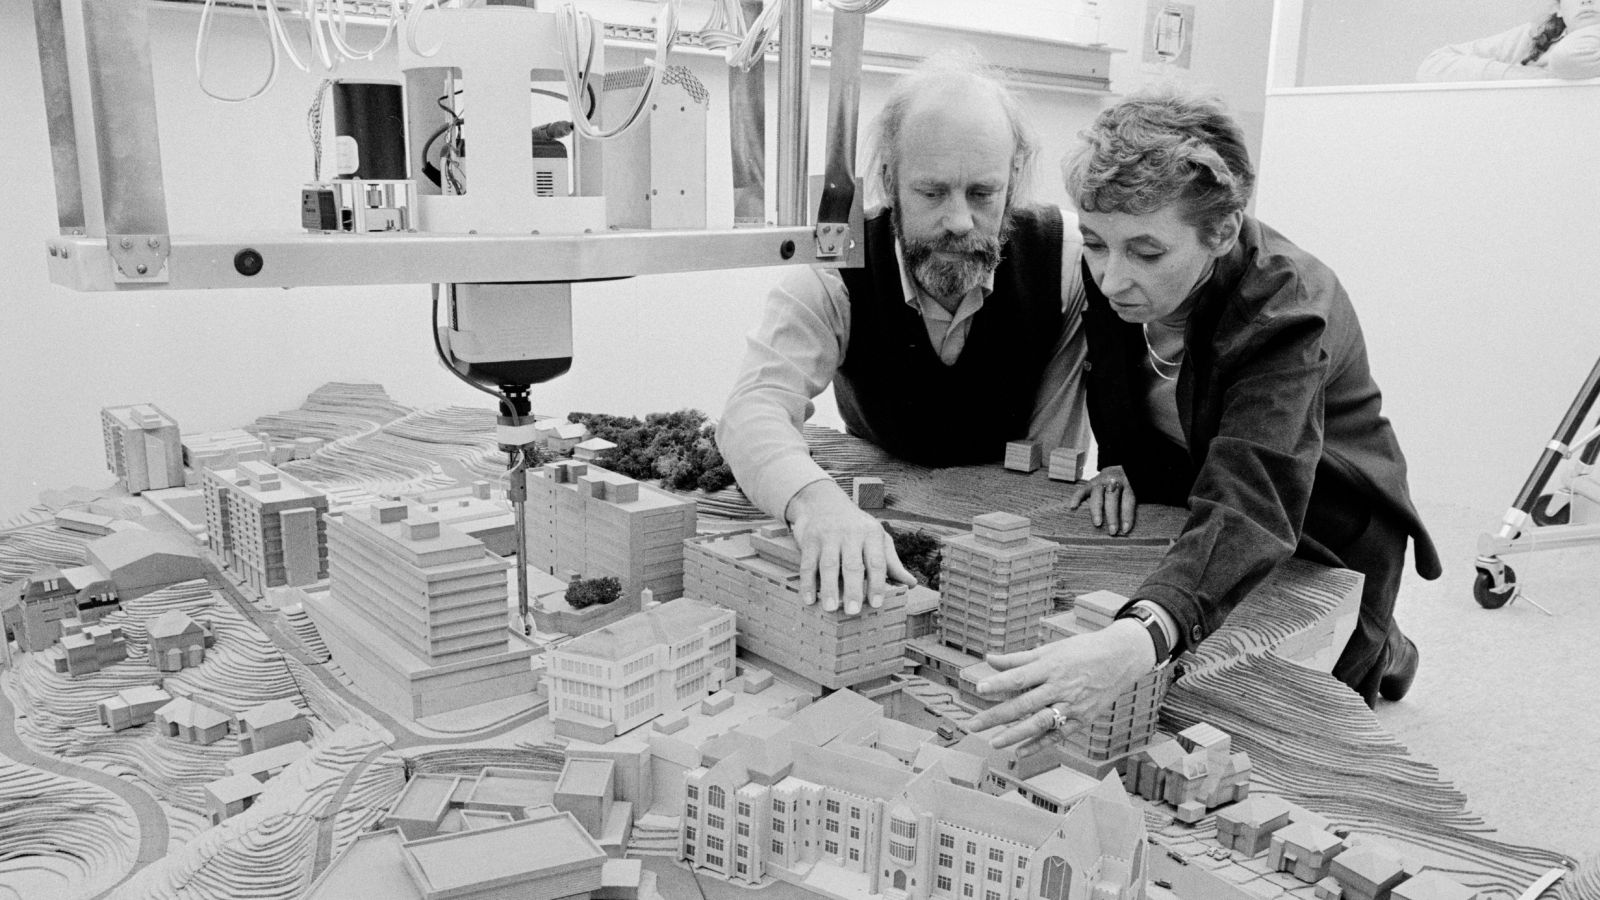 Helen Tippett and David Reed looking over an architectural model 